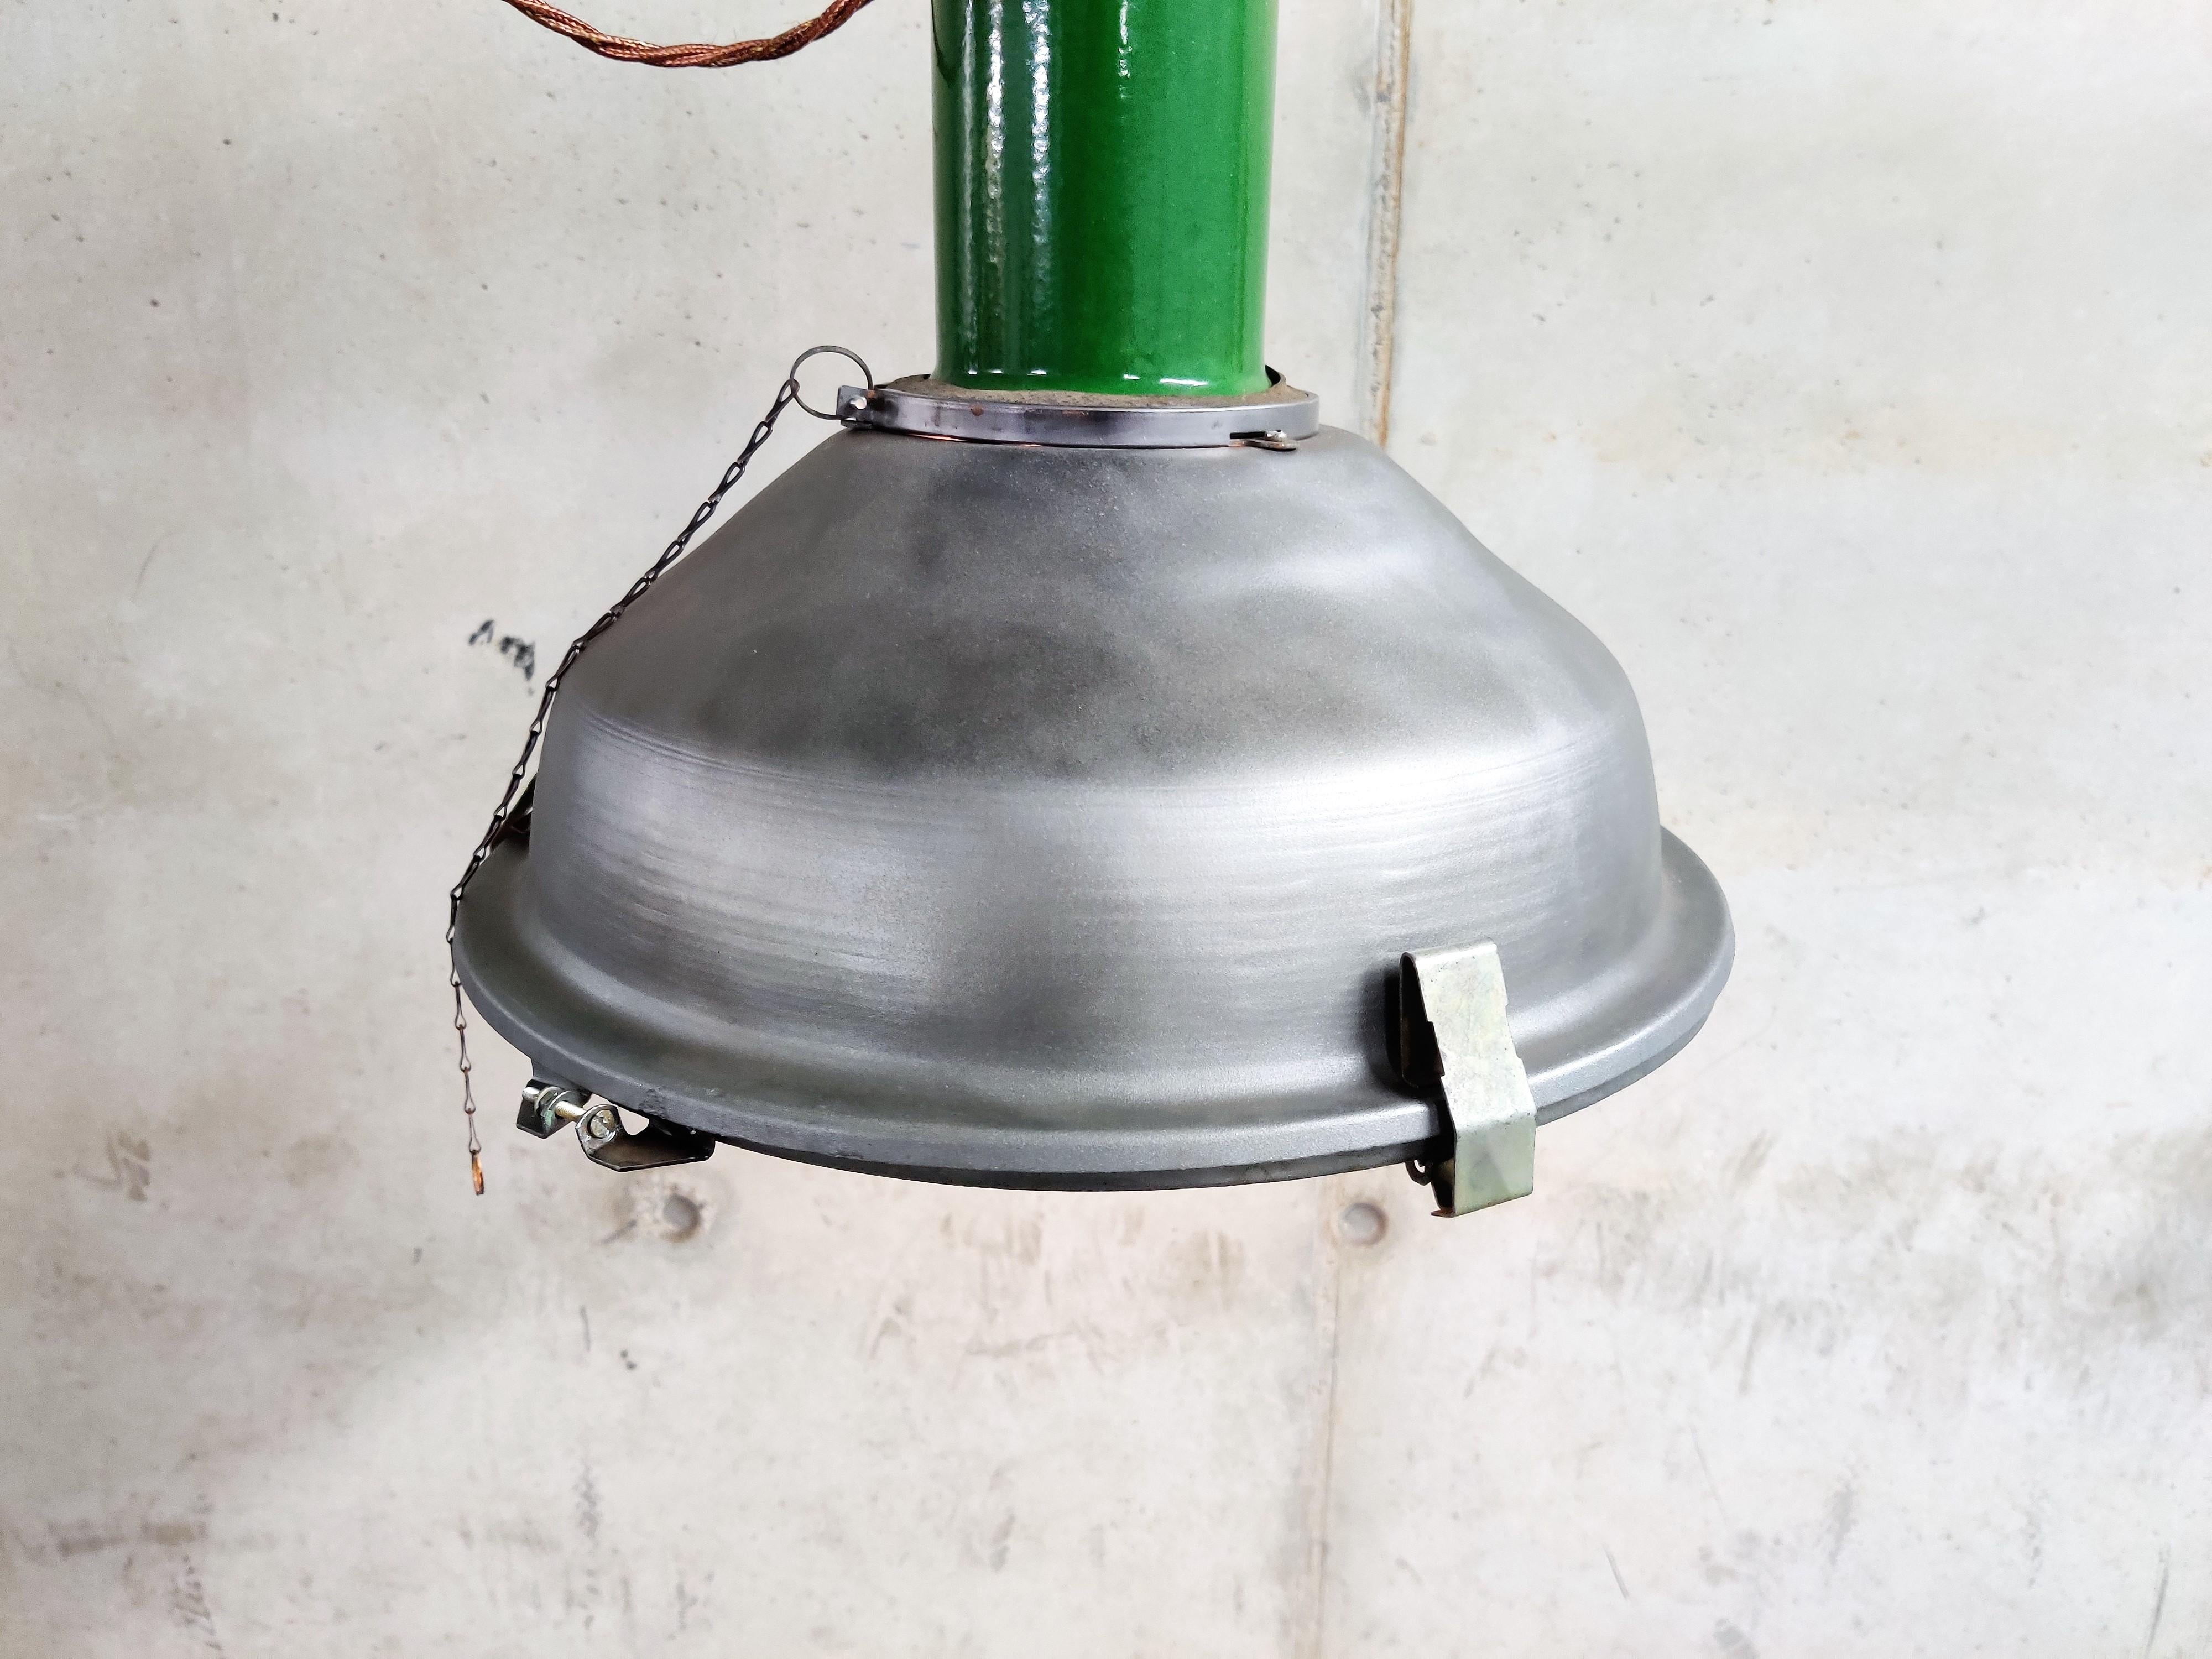 Vintage industrial pendant lights salvaged from an old warehouse in Russia.

These lamps are in a beautiful used condition and have their original glass.

Polished metal shades.

The industrial lamps look stunning in a bar, restaurant, shop or